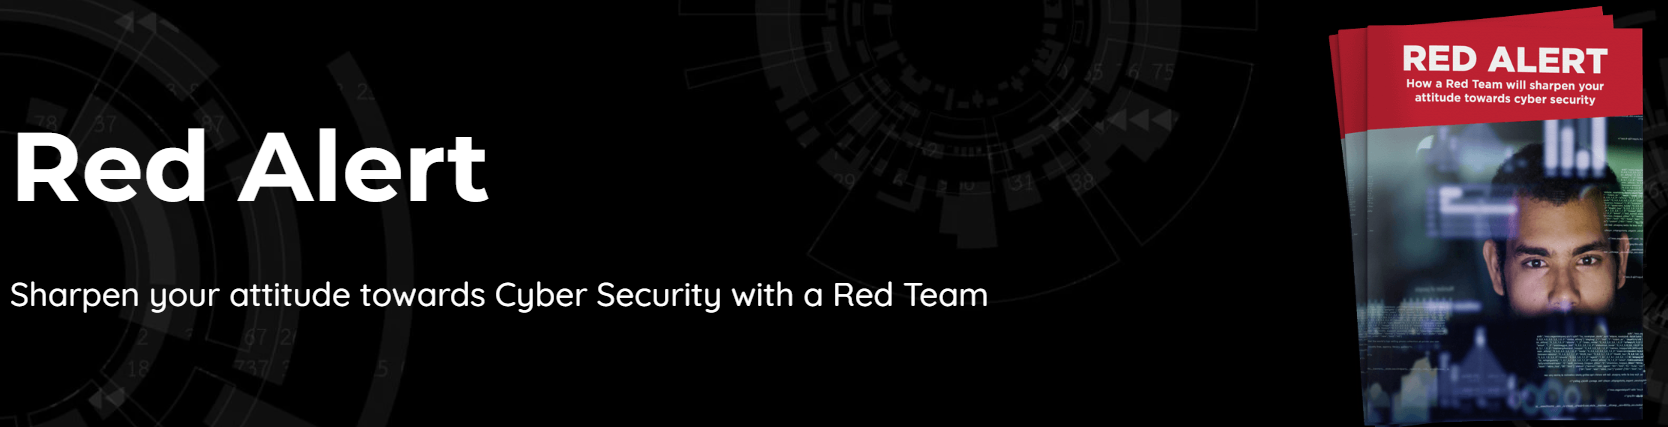 FireShot Capture 169 - Red Team Testing eBook - Cyber Security - Integrity360_ - info.integrity360.com